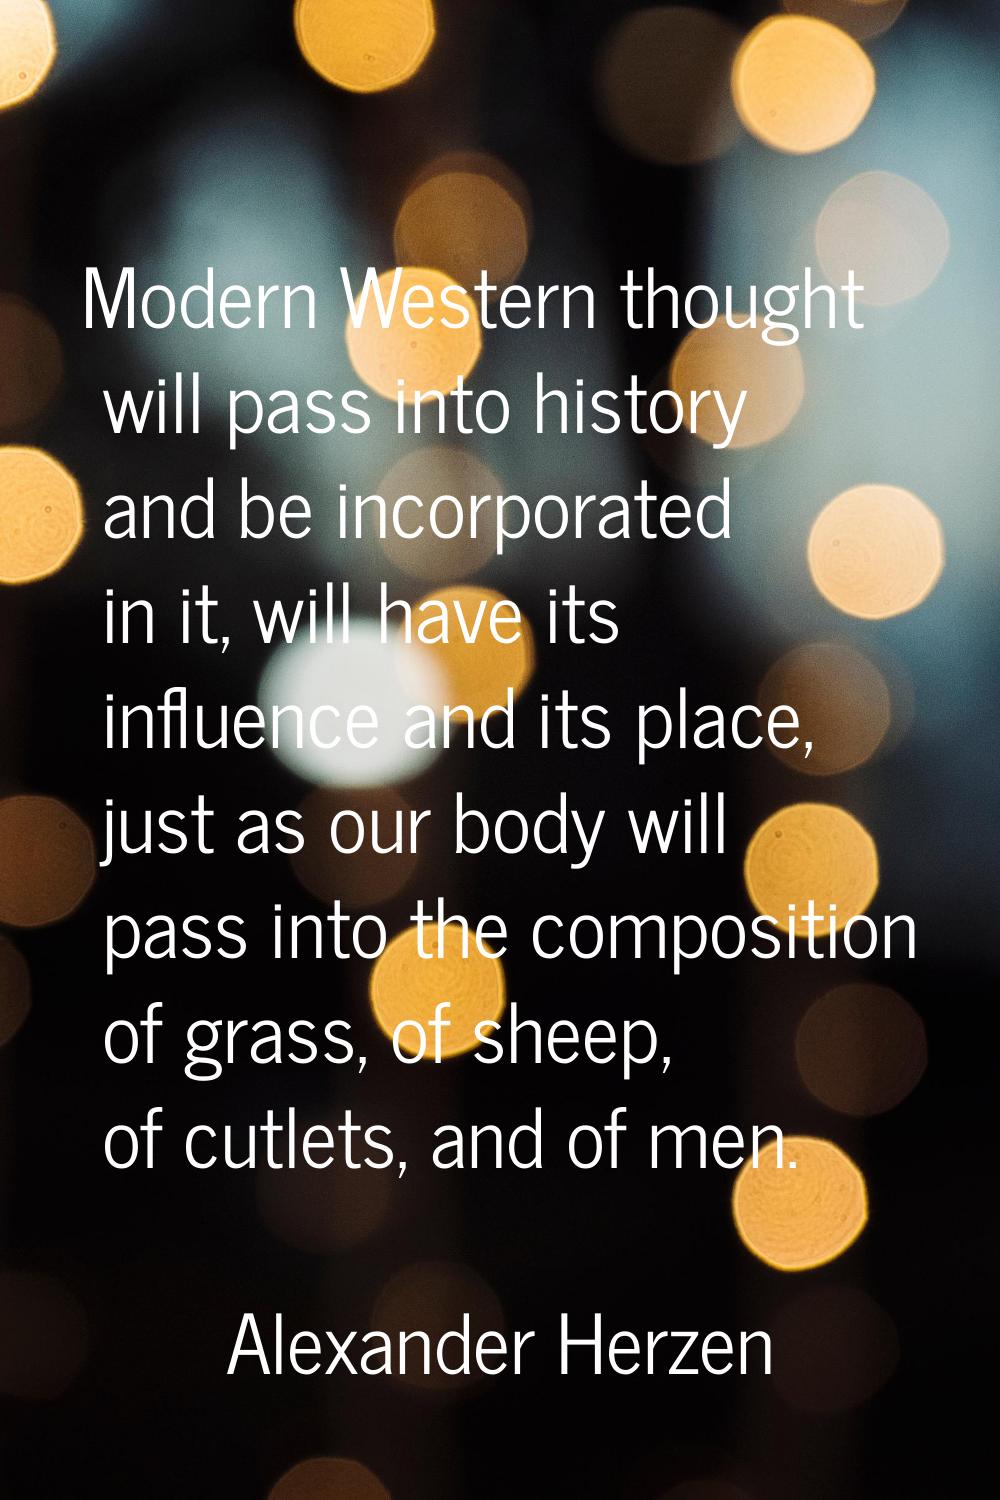 Modern Western thought will pass into history and be incorporated in it, will have its influence an